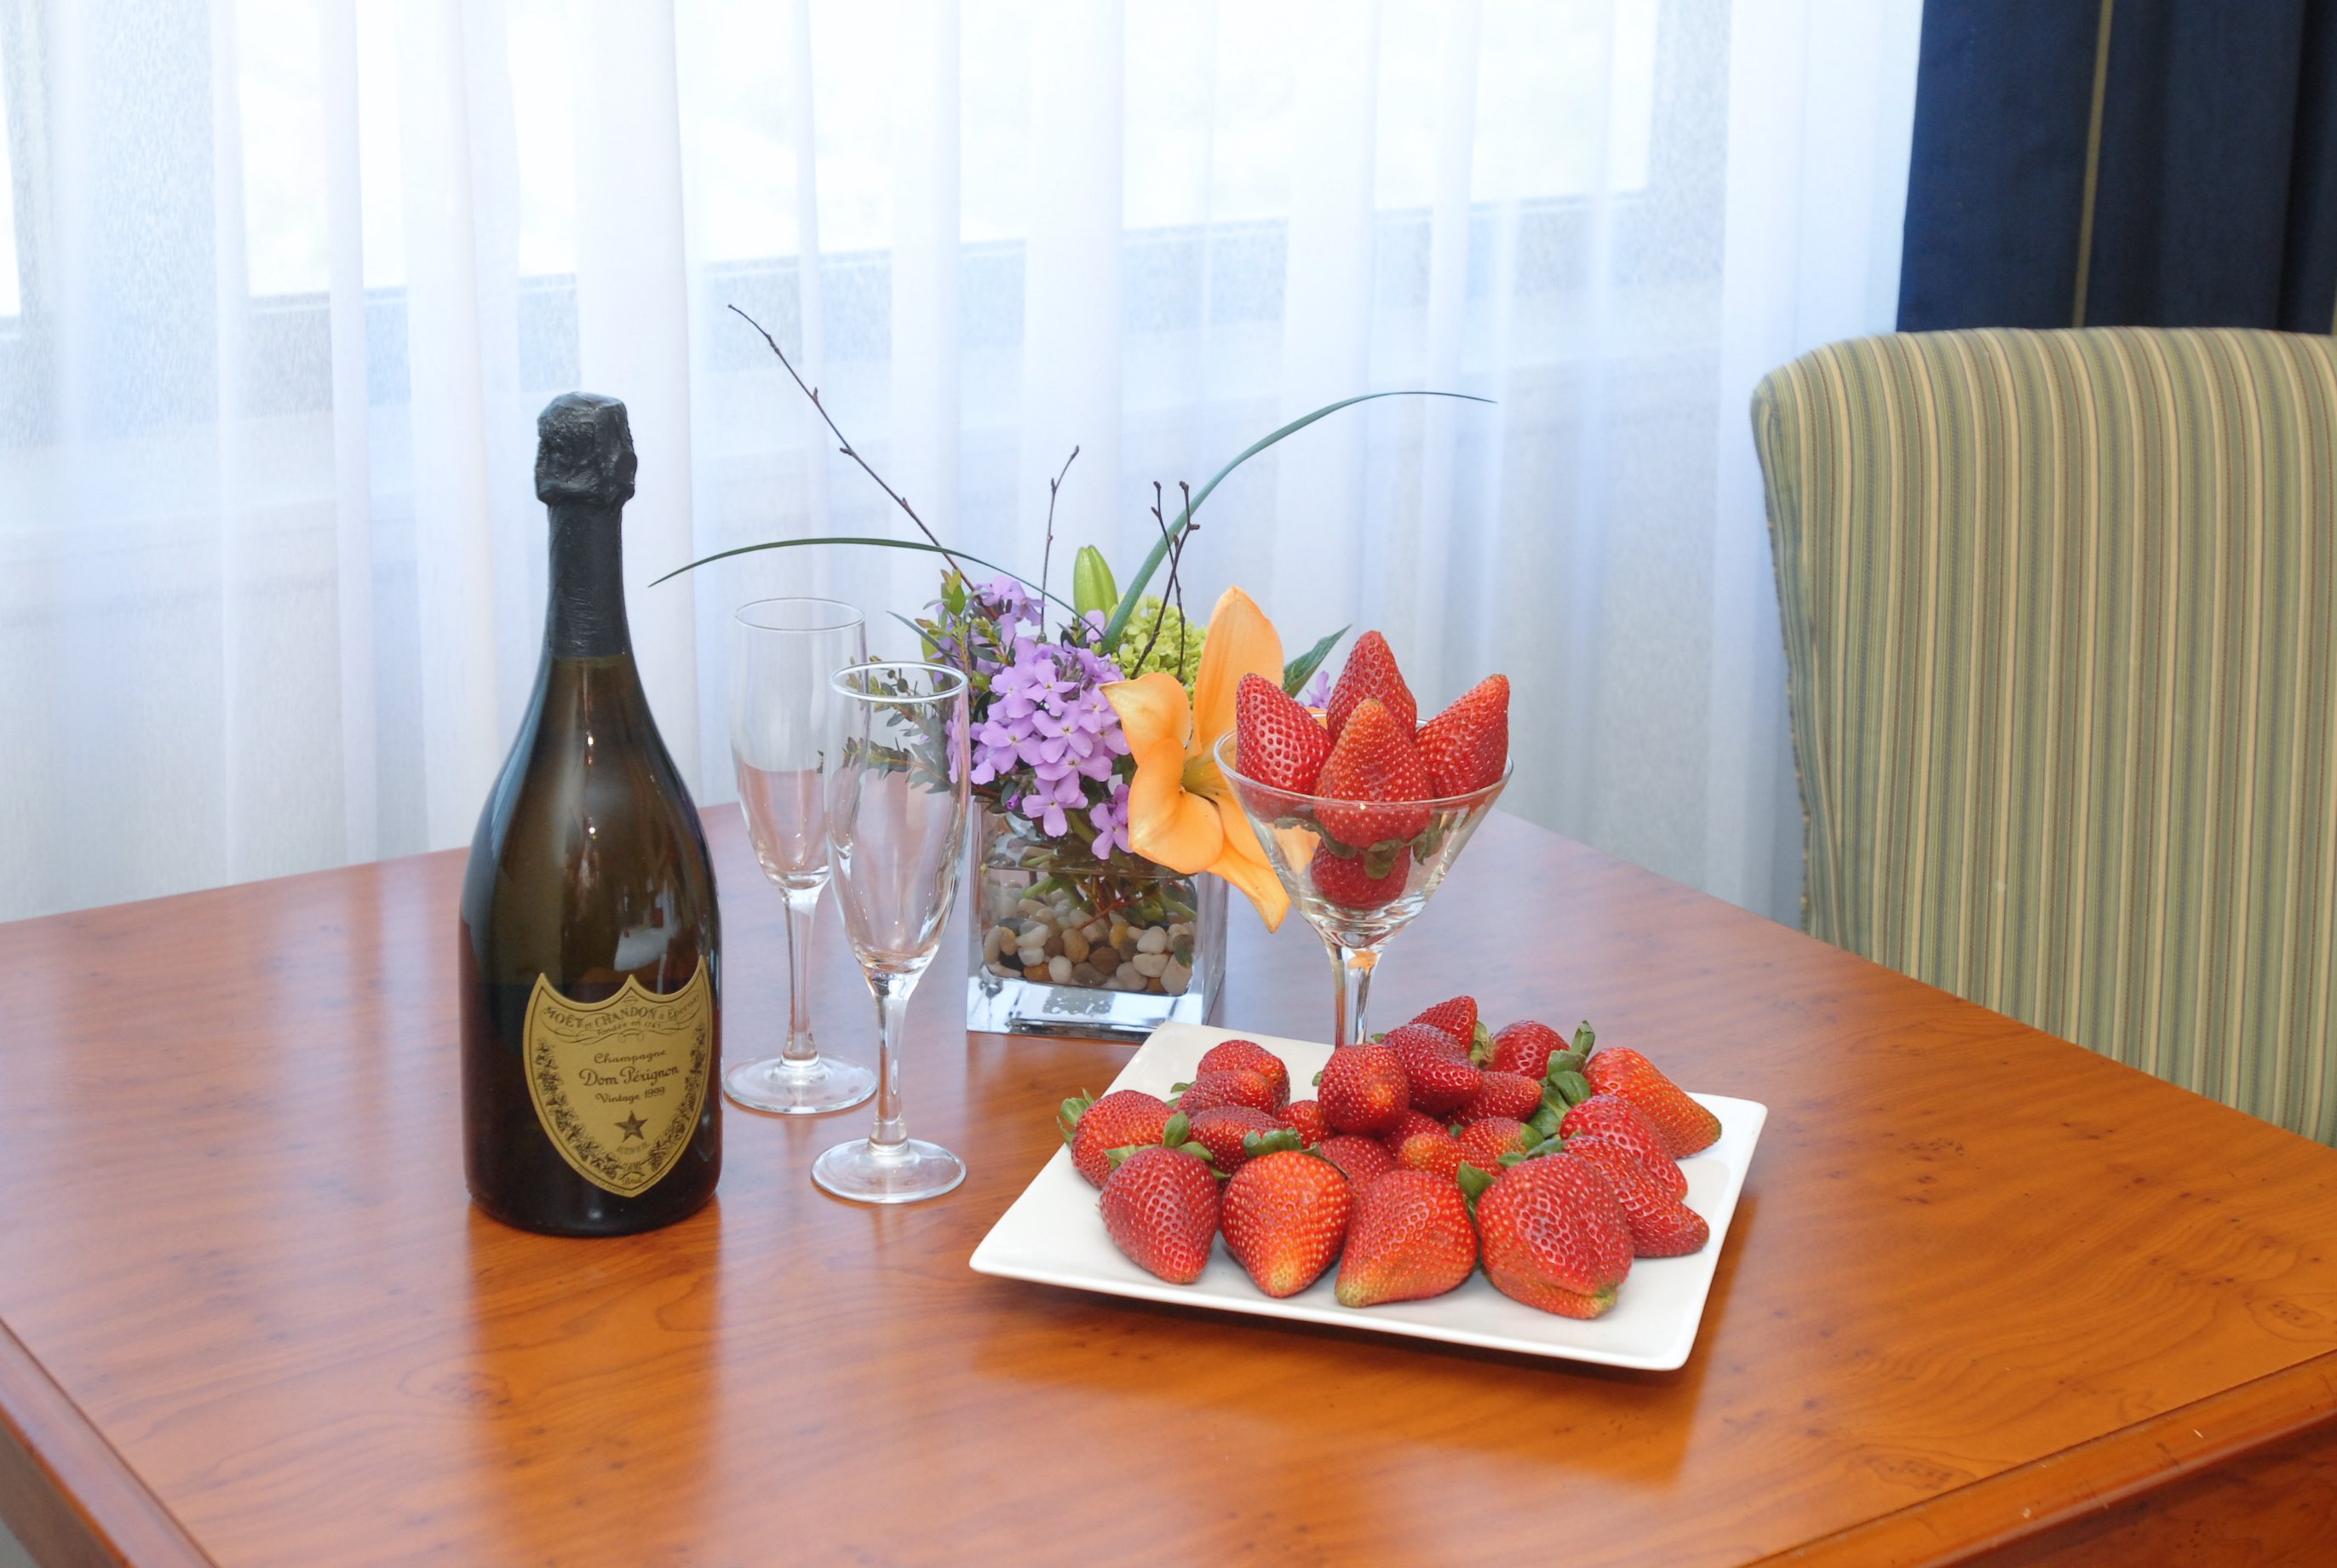 Room Service can help you celebrate a birthday or anniversary